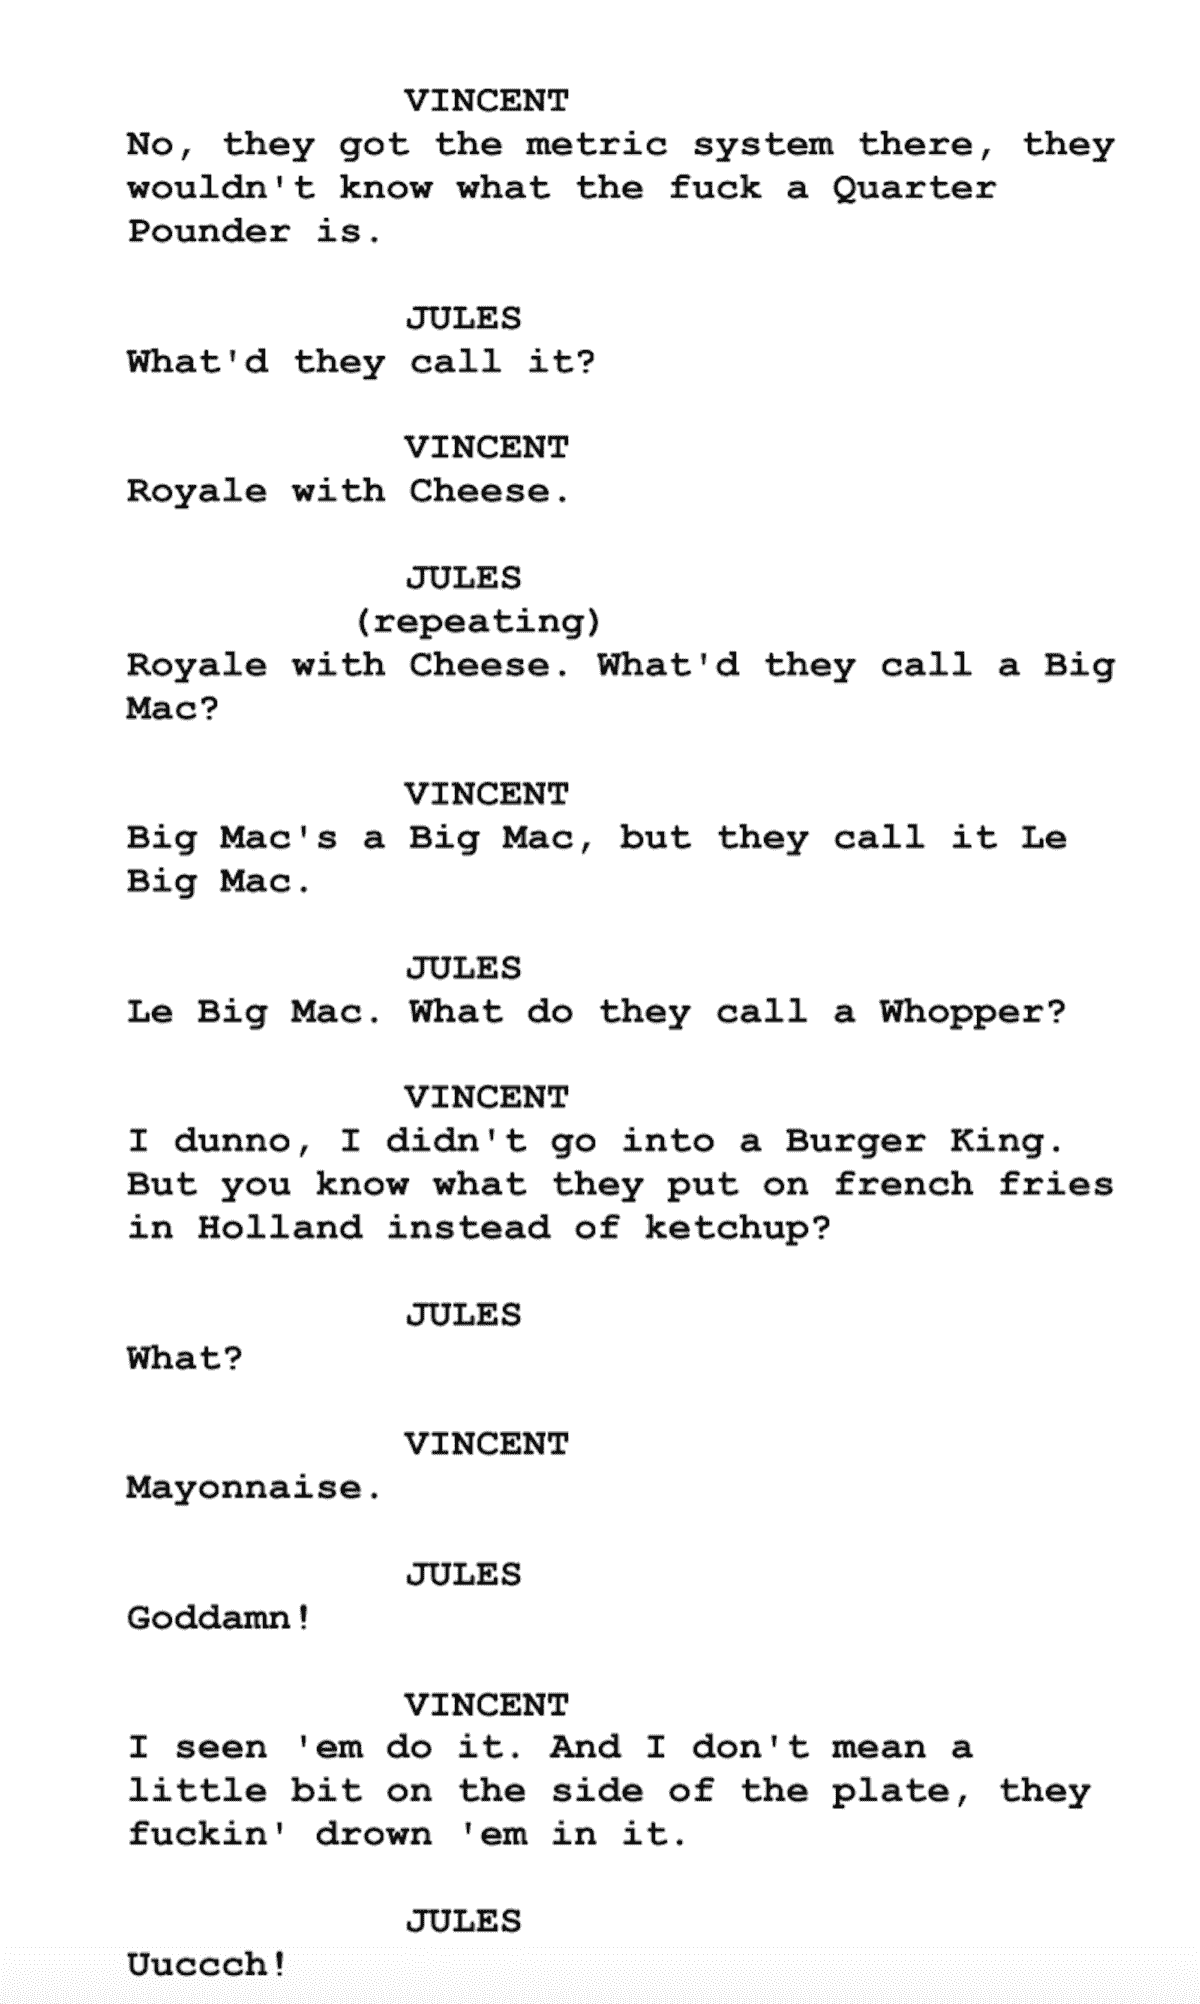 Screenplay Examples - Pulp Fiction Script - Screenplay Snippet 10 - Vincent and Jules